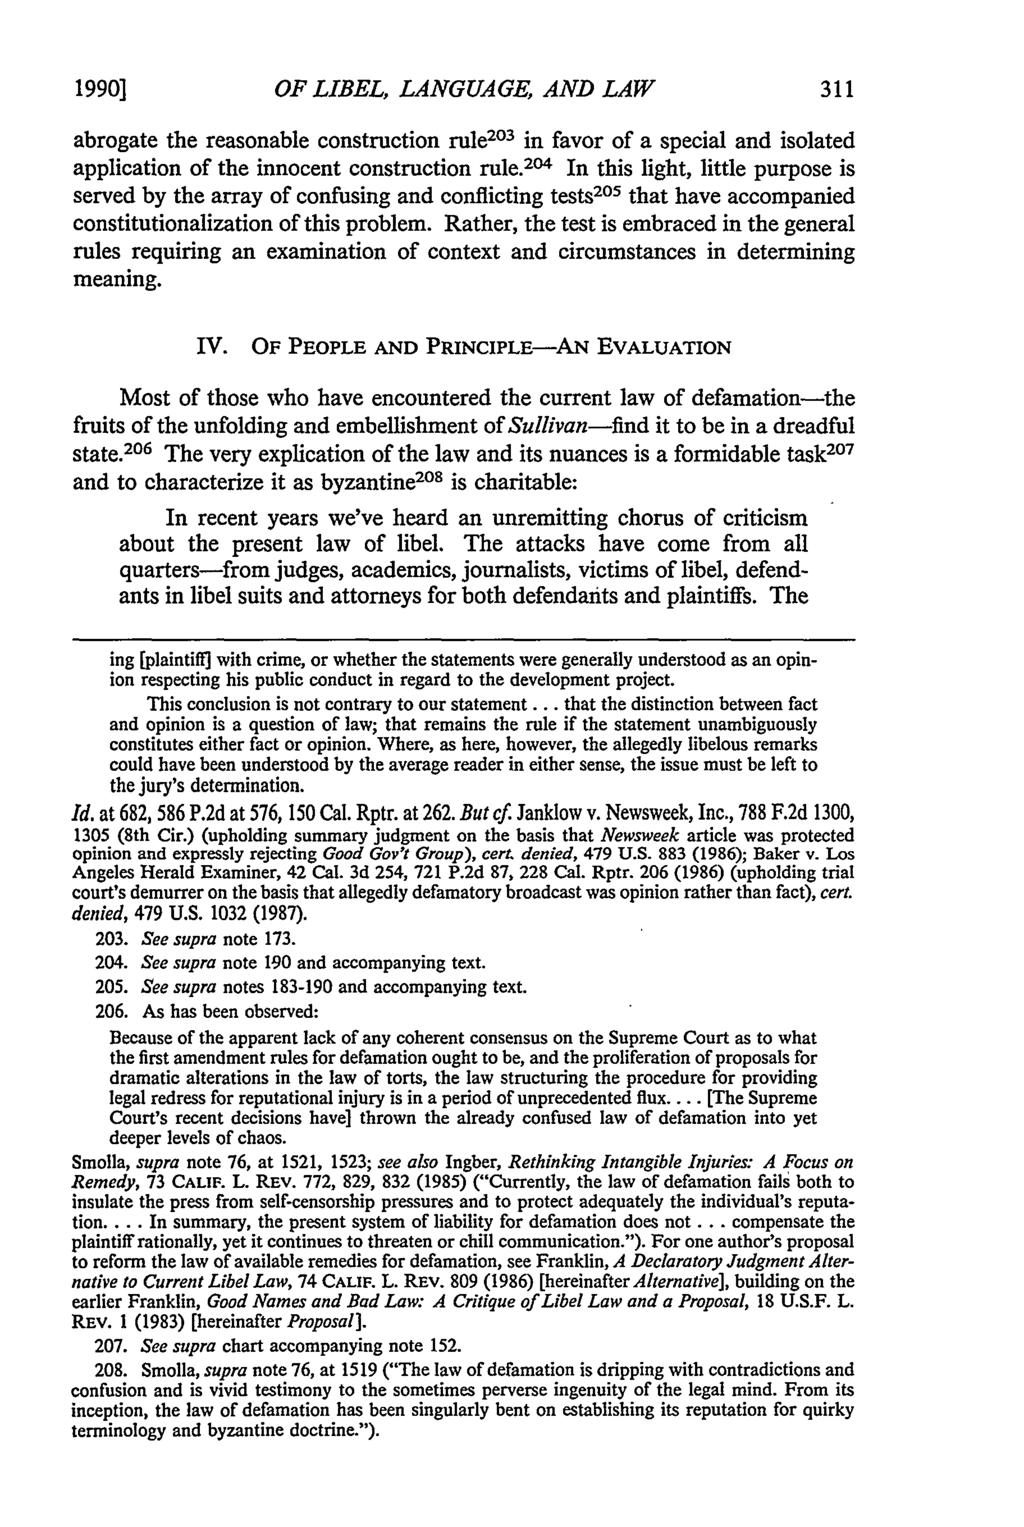 1990] OF LIBEL, LANGUAGE, AND LAW abrogate the reasonable construction rule 20 3 in favor of a special and isolated application of the innocent construction rule.